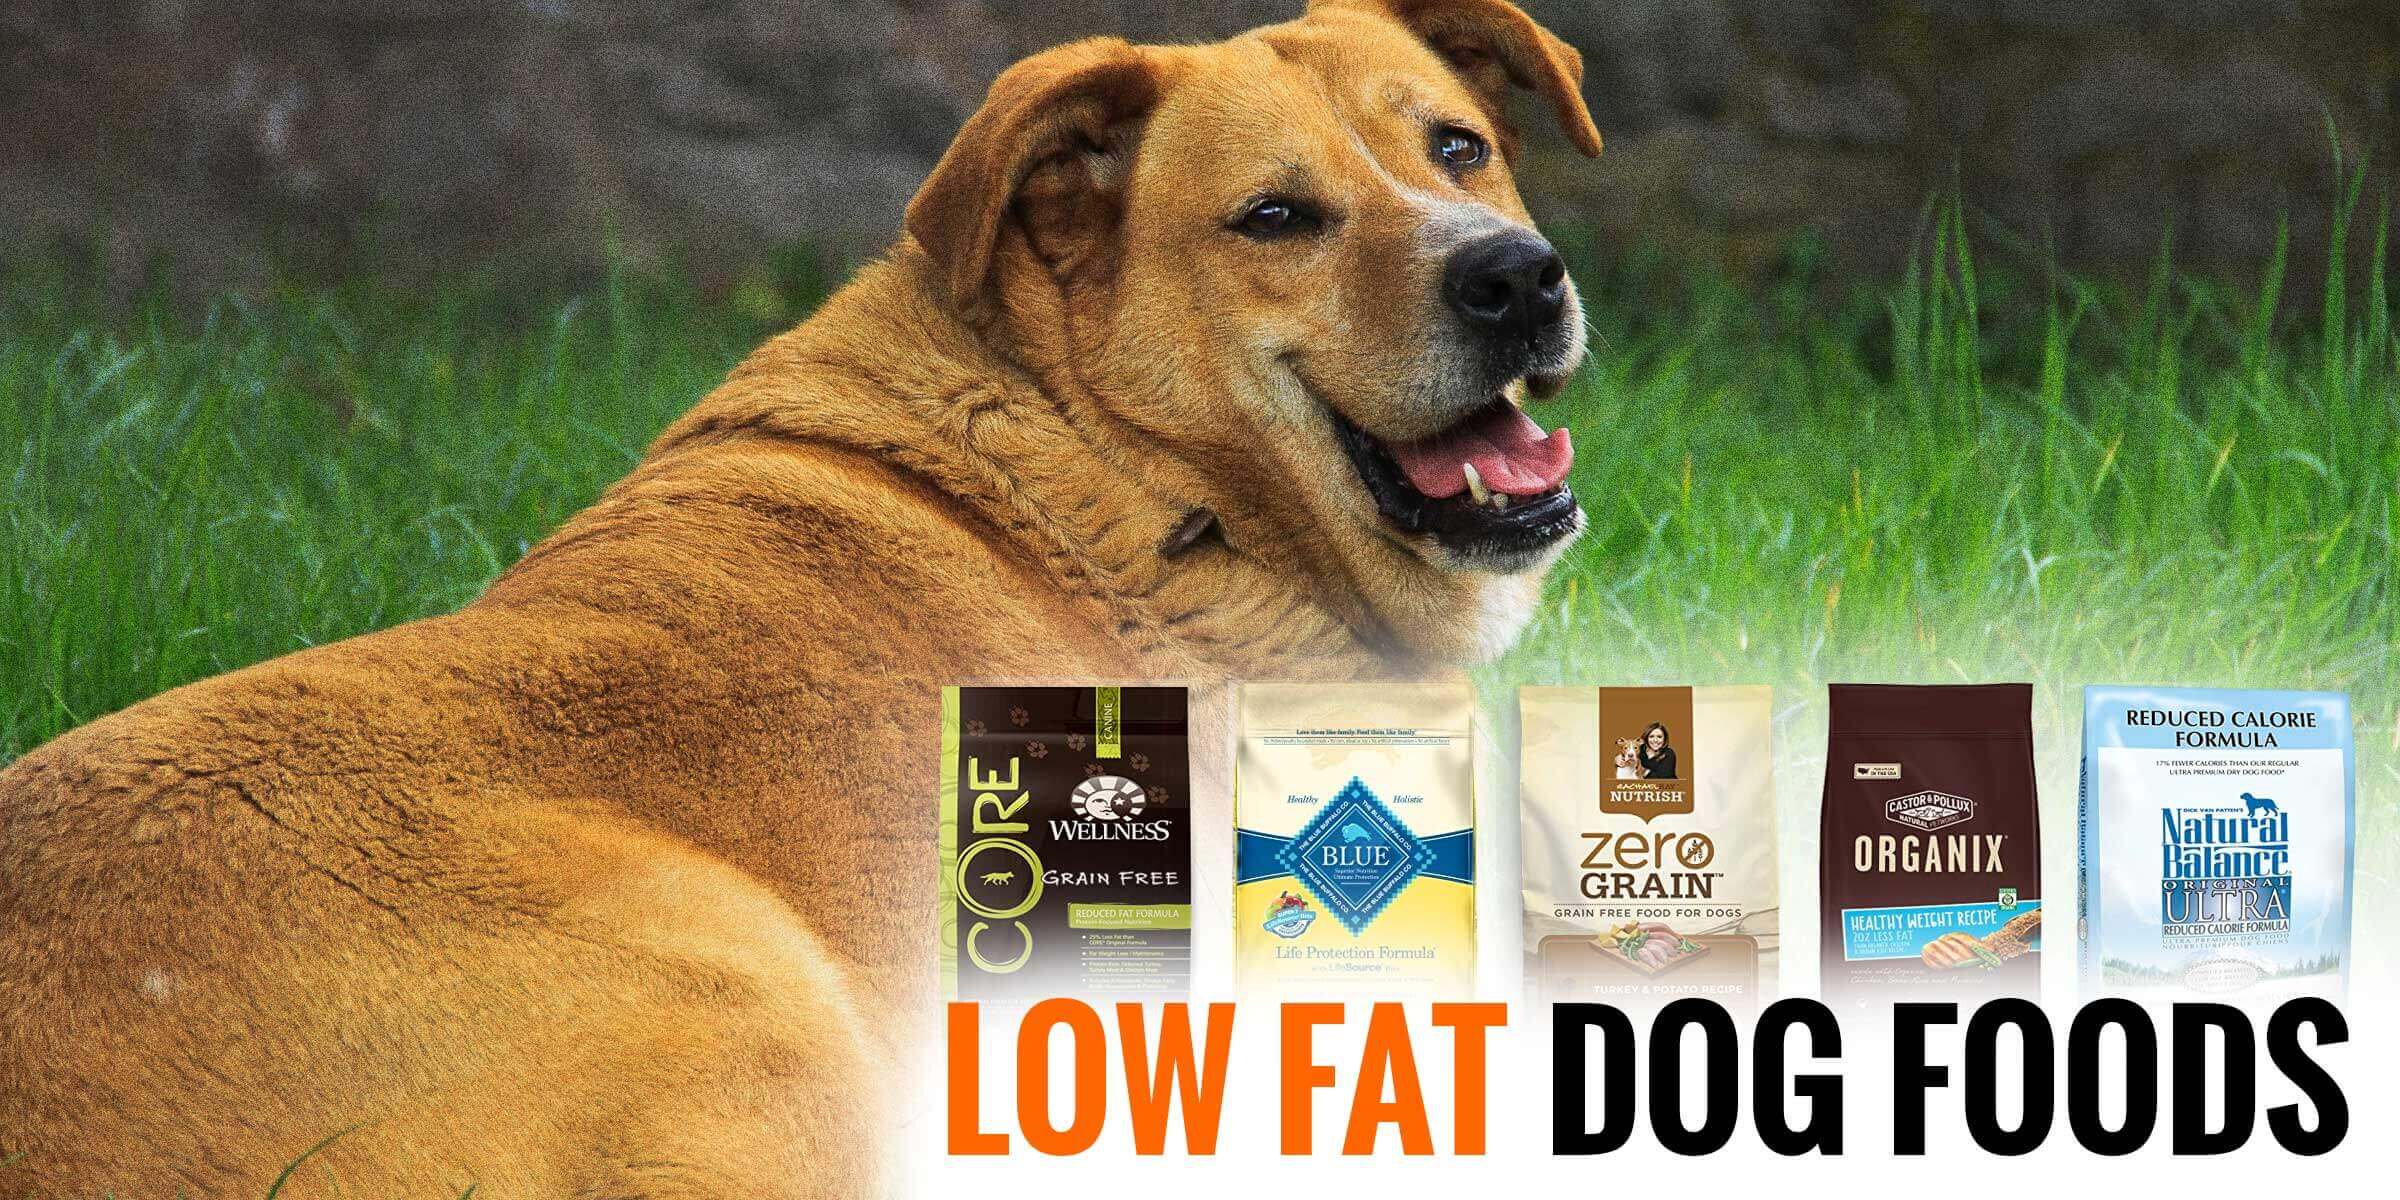 Low Fat Dog Food Guide Reviews Of 5 Best Weight Control Foods Chicken meal, barley, and brown rice recipe. low fat dog food guide reviews of